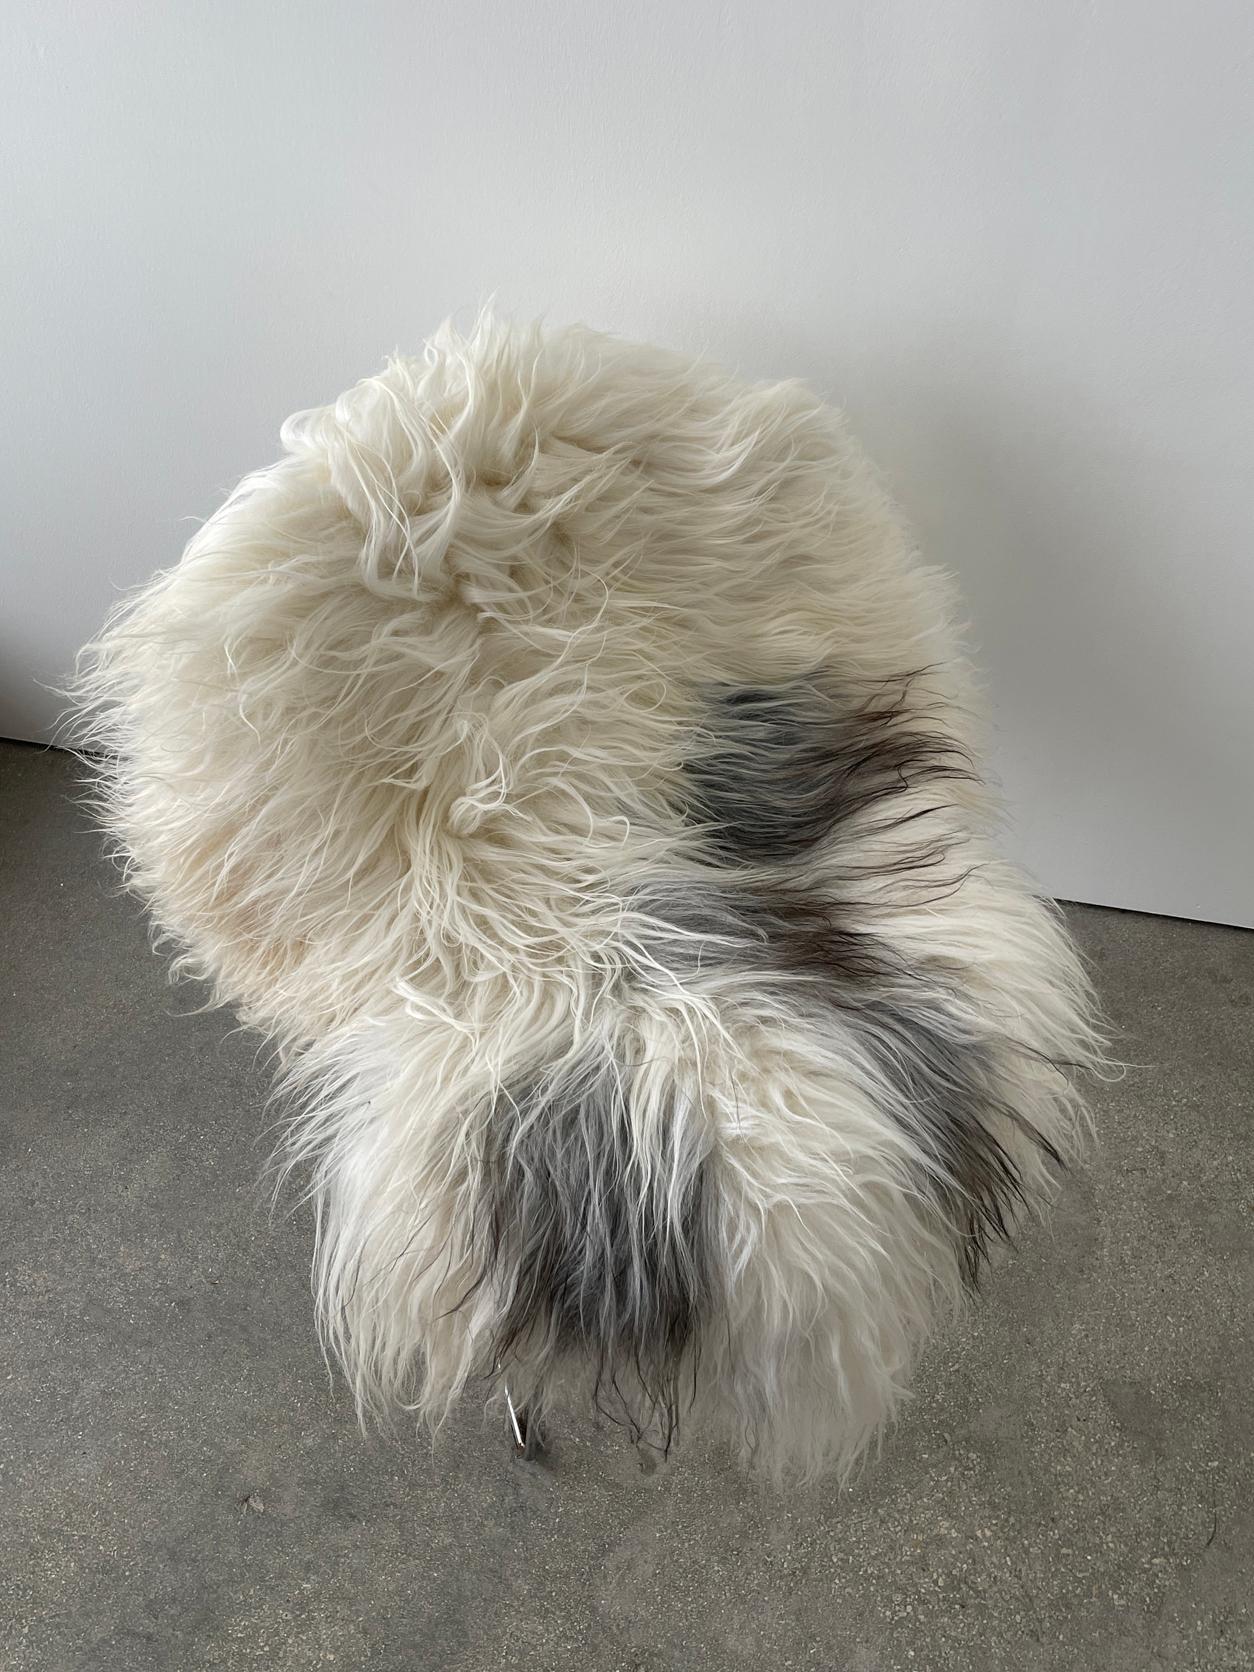 21st century Icelandic Sheepskin with a thick coat and unique and beautiful colorway. Perfect XL size for a rug or furniture cover to add a luxurious look to your space.